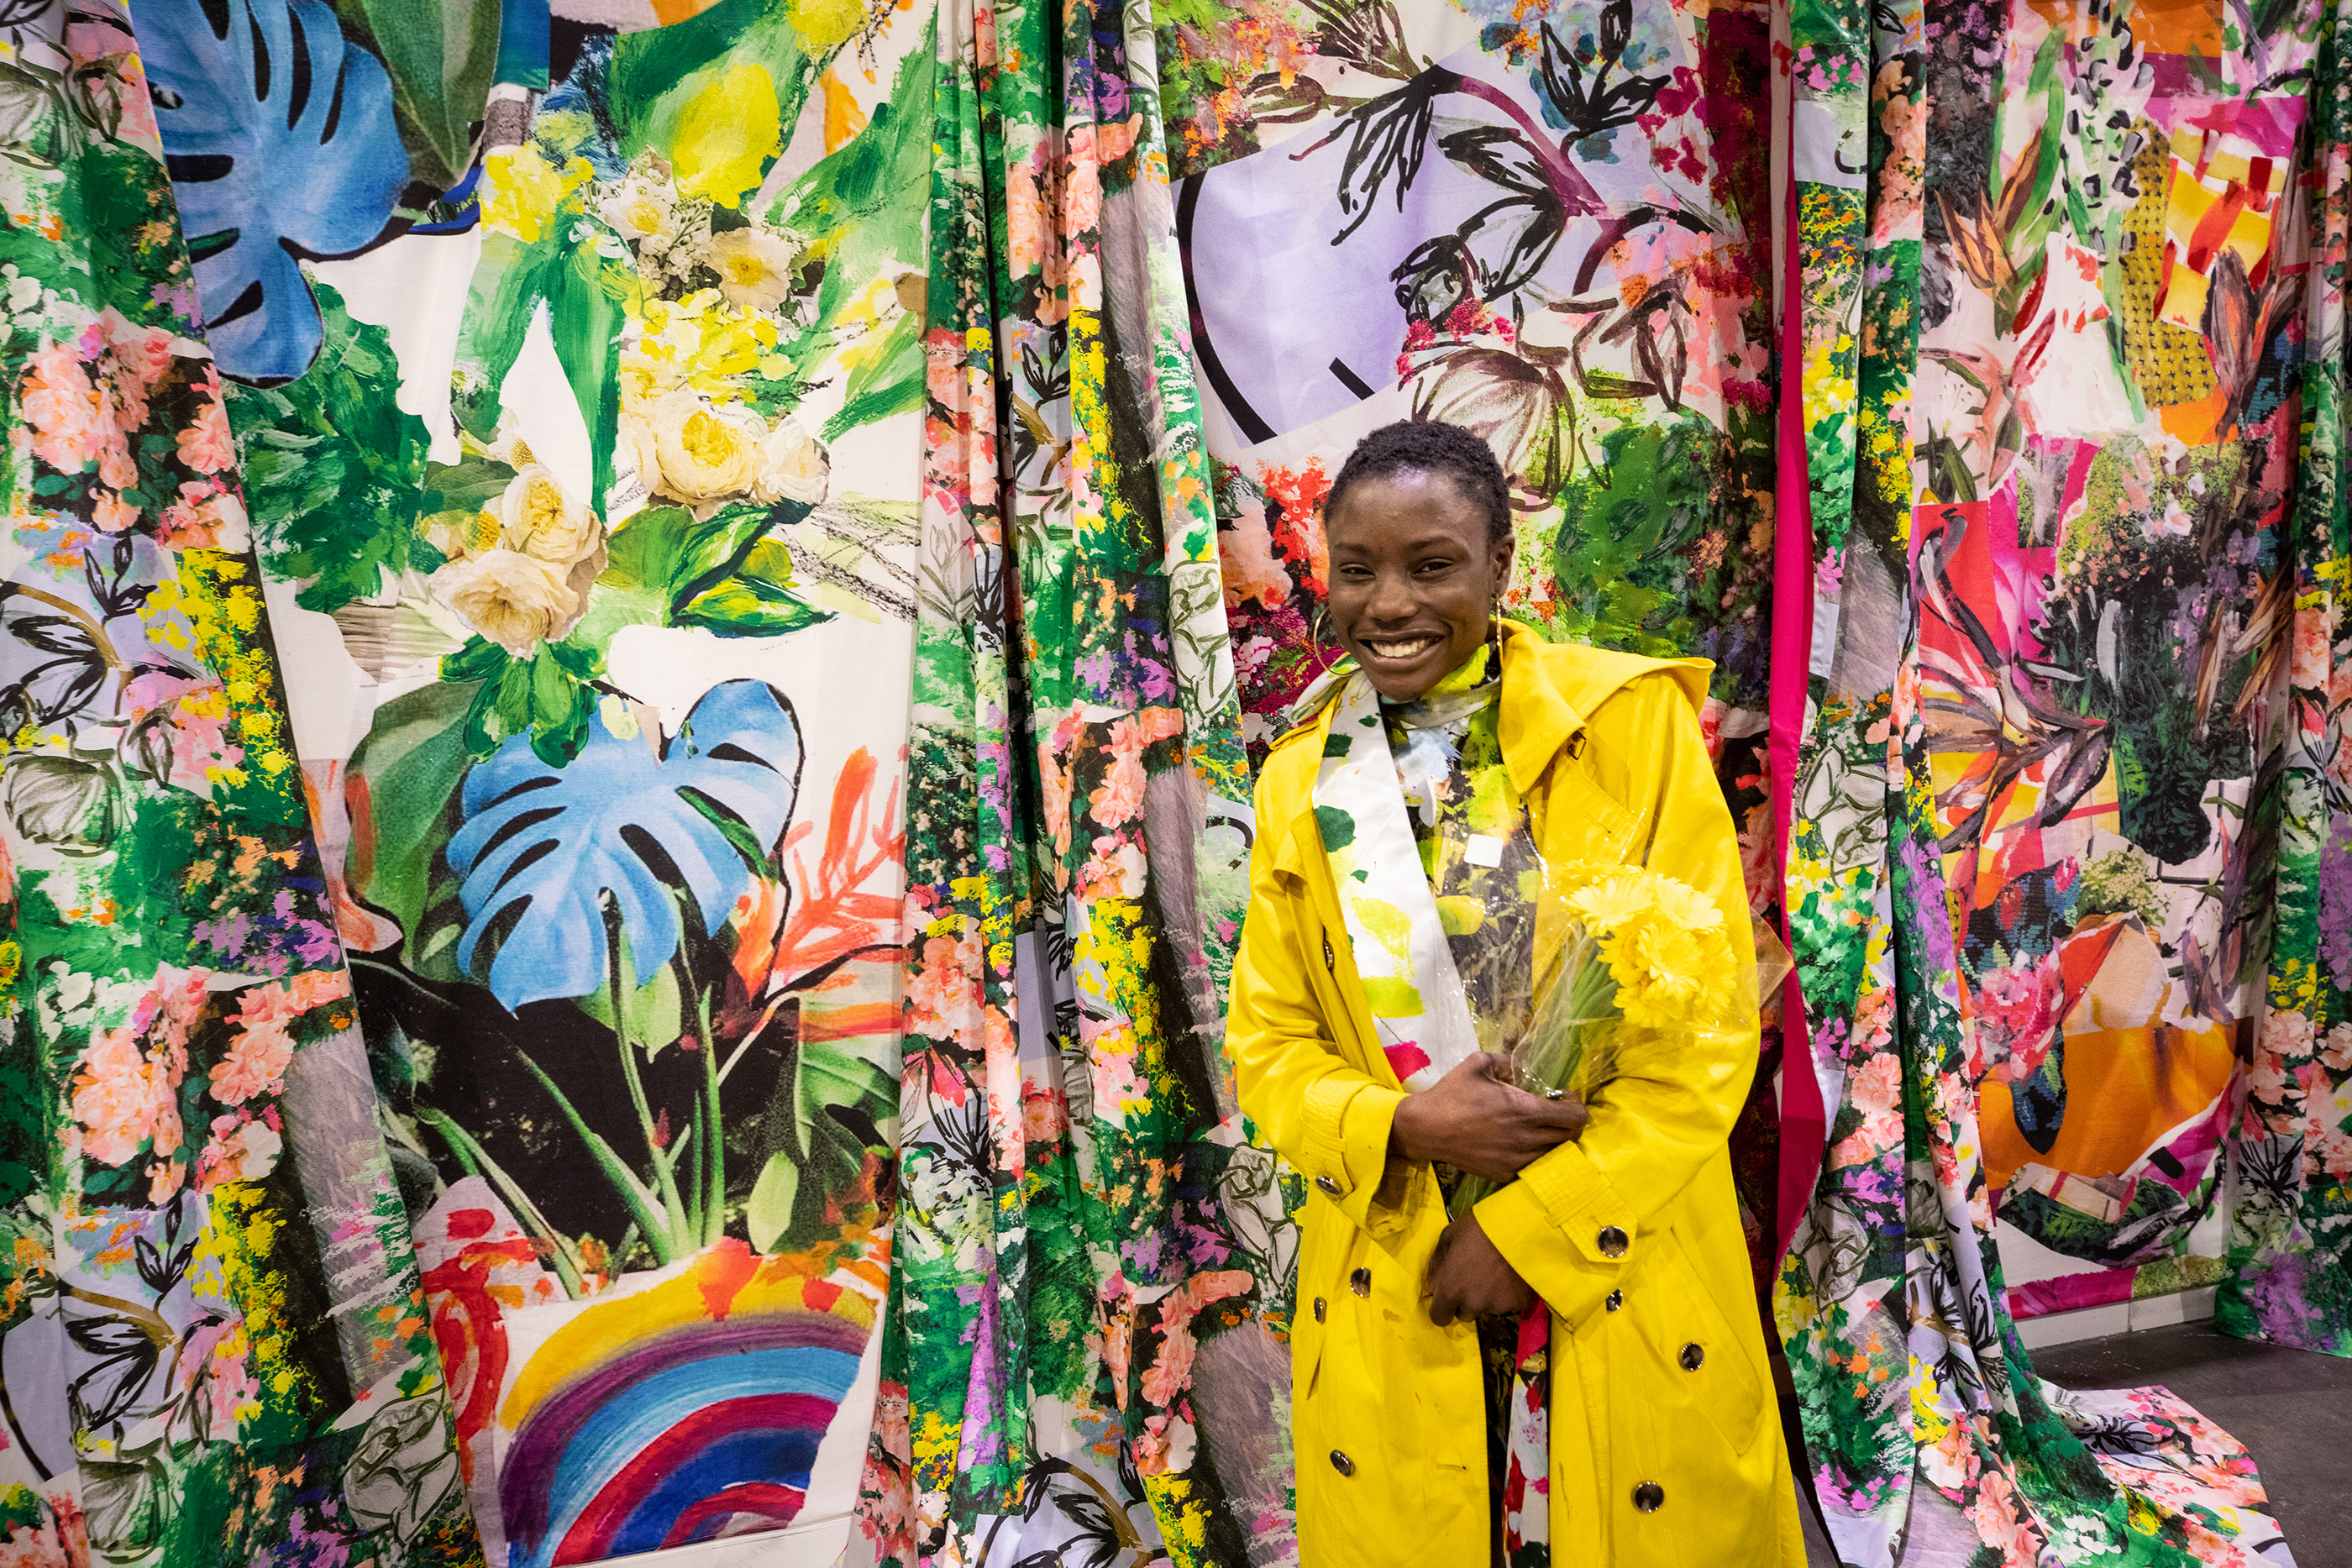 student with flowers poses in front of tropical textile